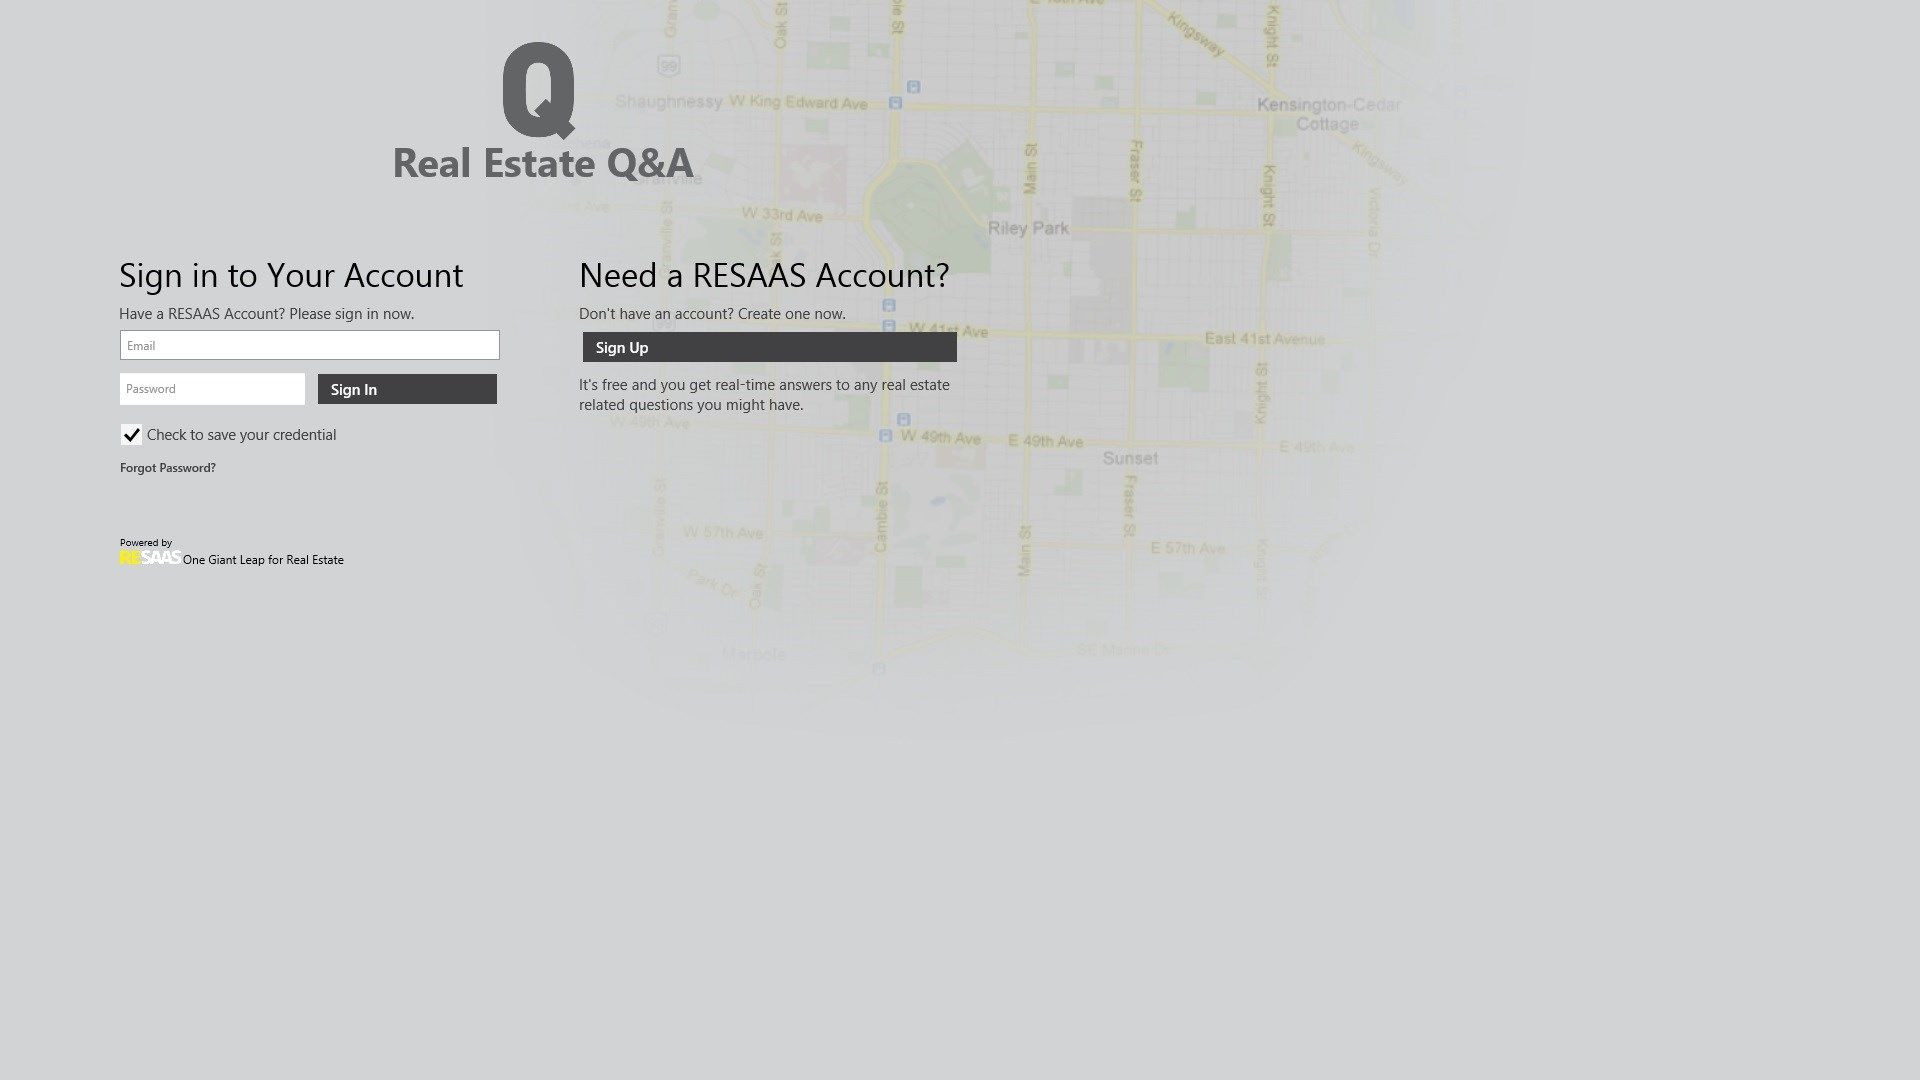 Sign in or join RESAAS to gain free access to the wealth of professional real estate knowledge available to answer your questions.